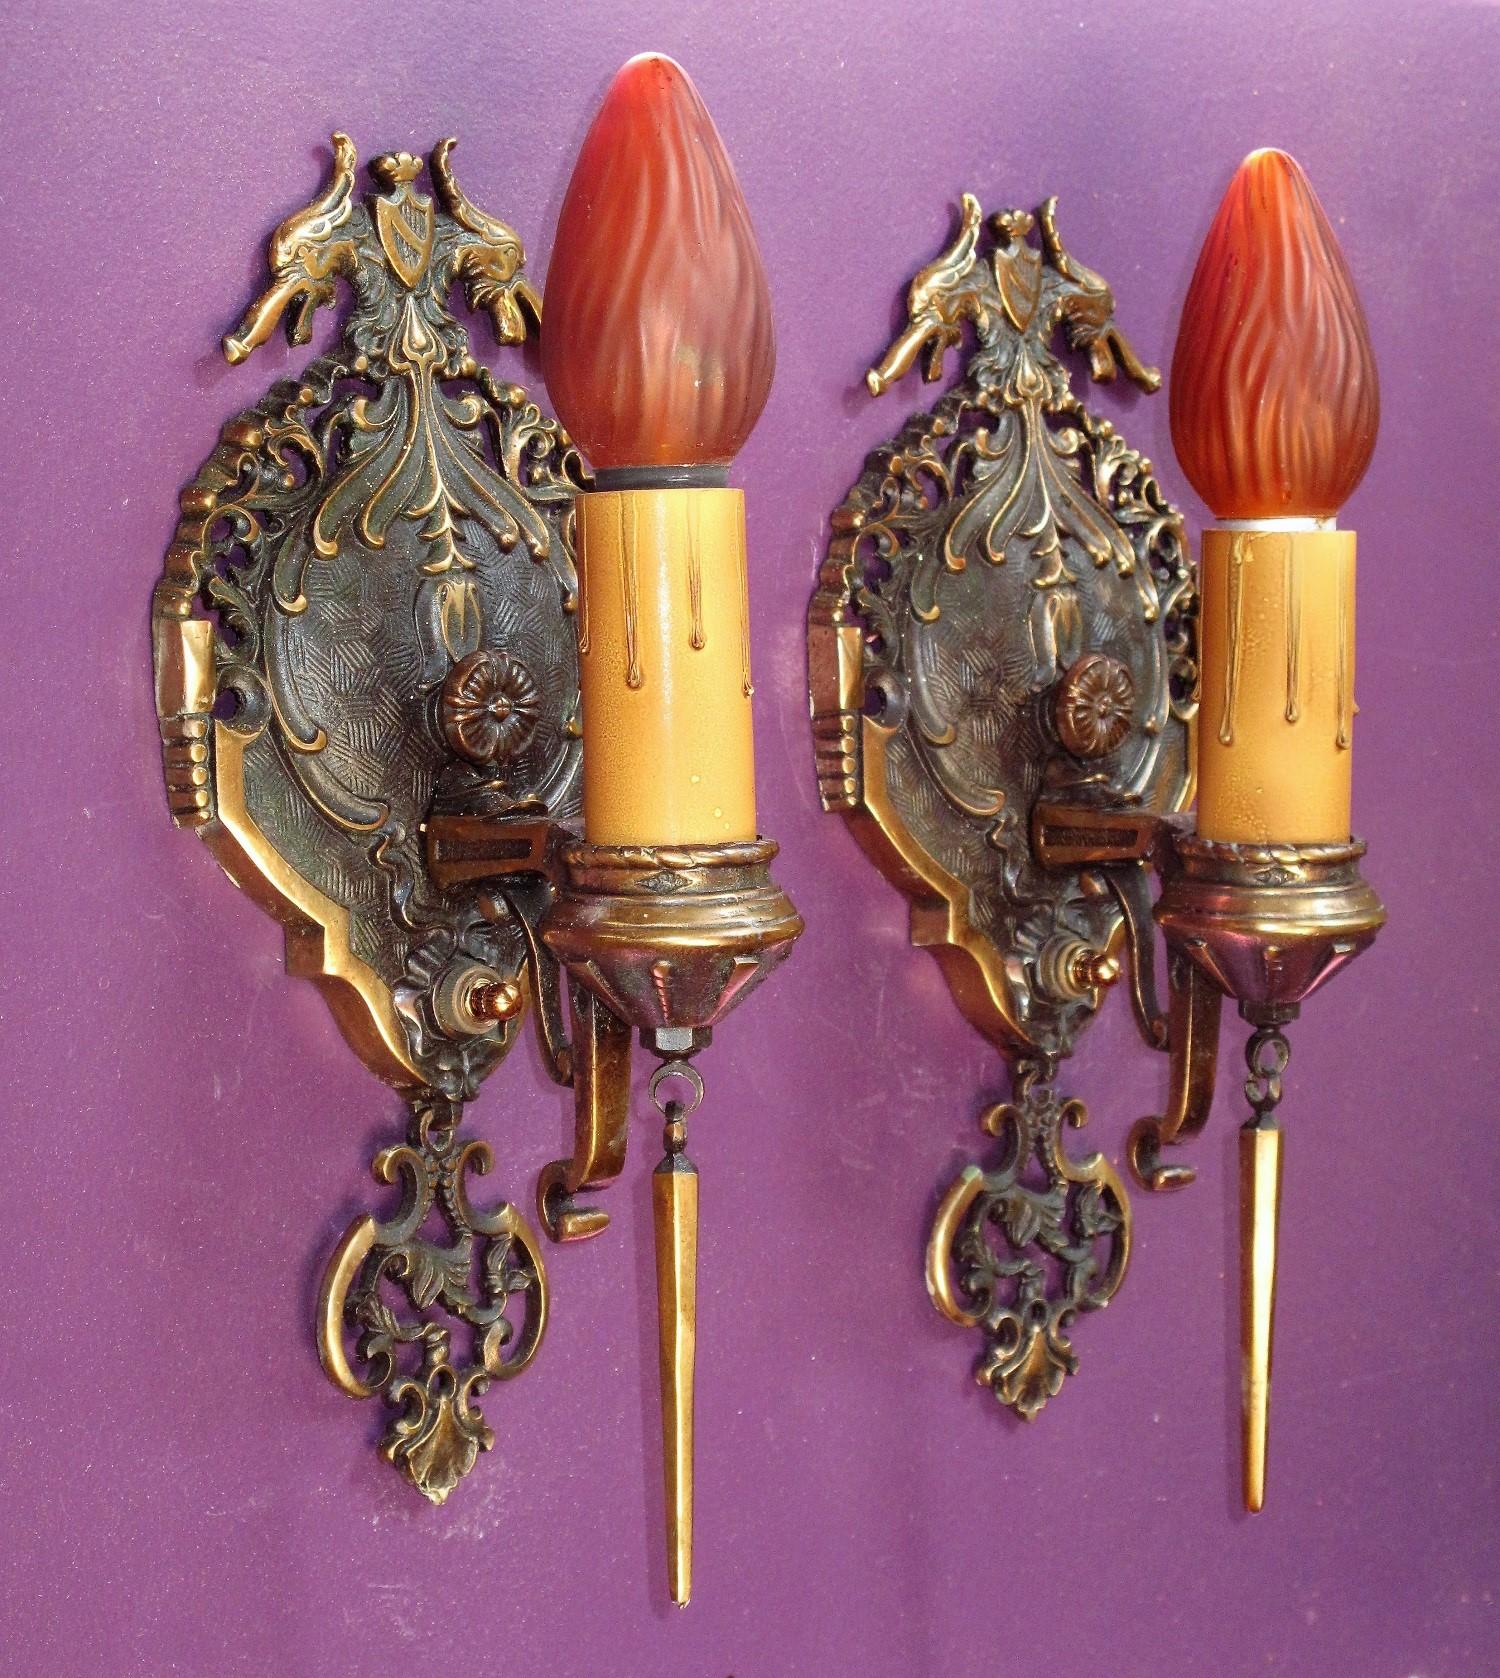 Wonderfully executed solid bronze sconces by Mid-West Chandelier Co., shown in their 1928 catalog. These outstanding sconces retain their original finish and patina with only a soft cleaning and a light wax to protect their already well preserved